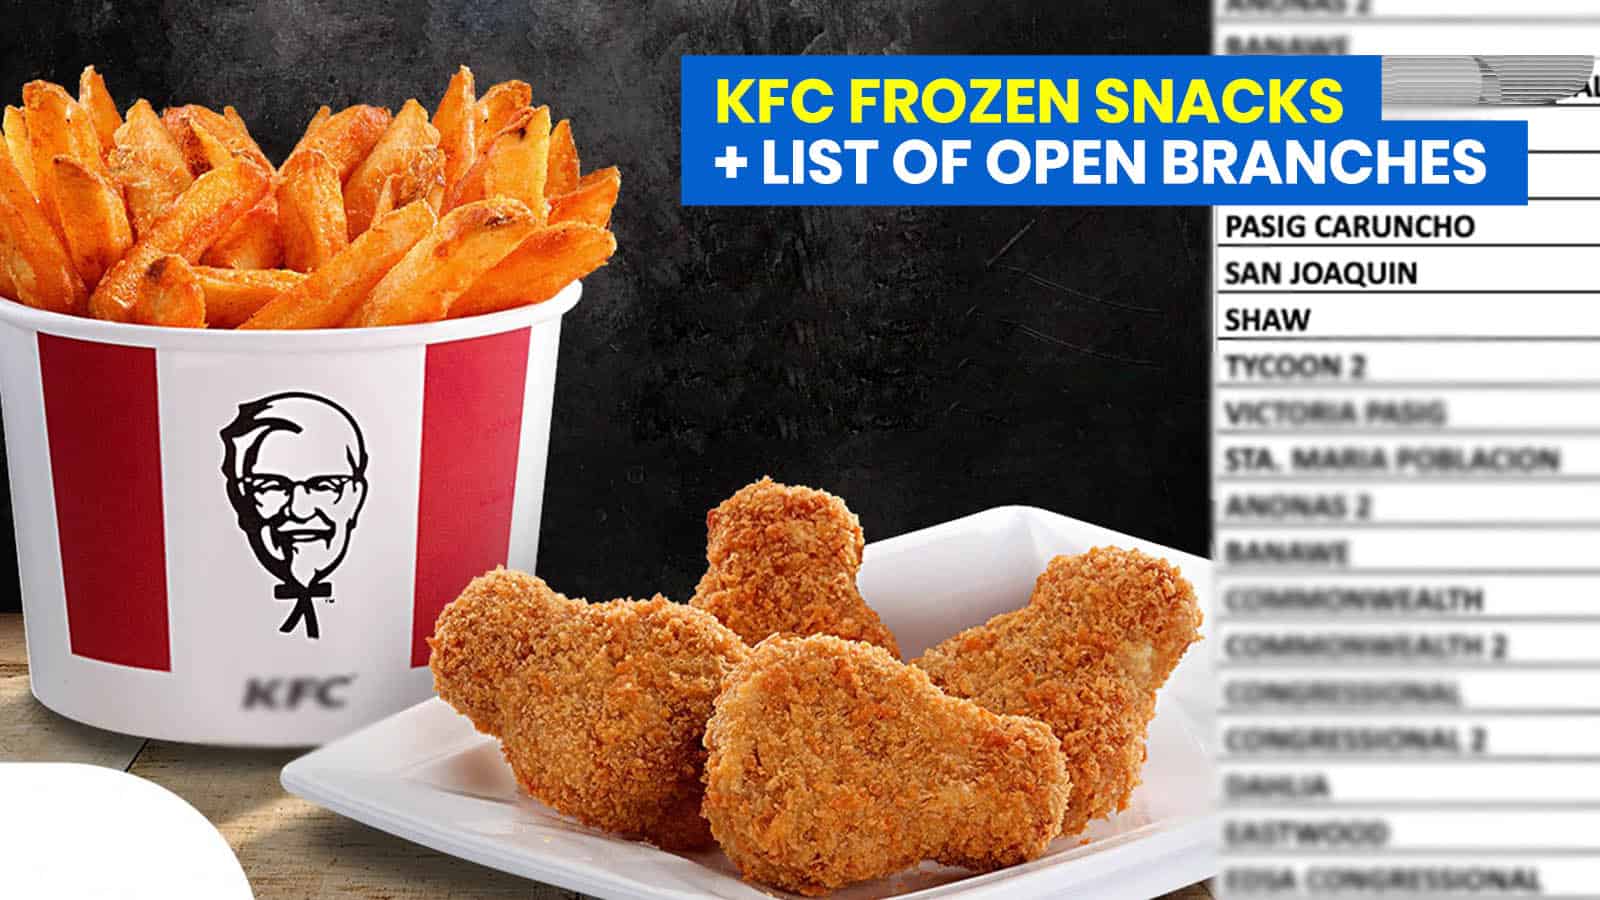 KFC Frozen Packs + List of Open Branches in the Philippines